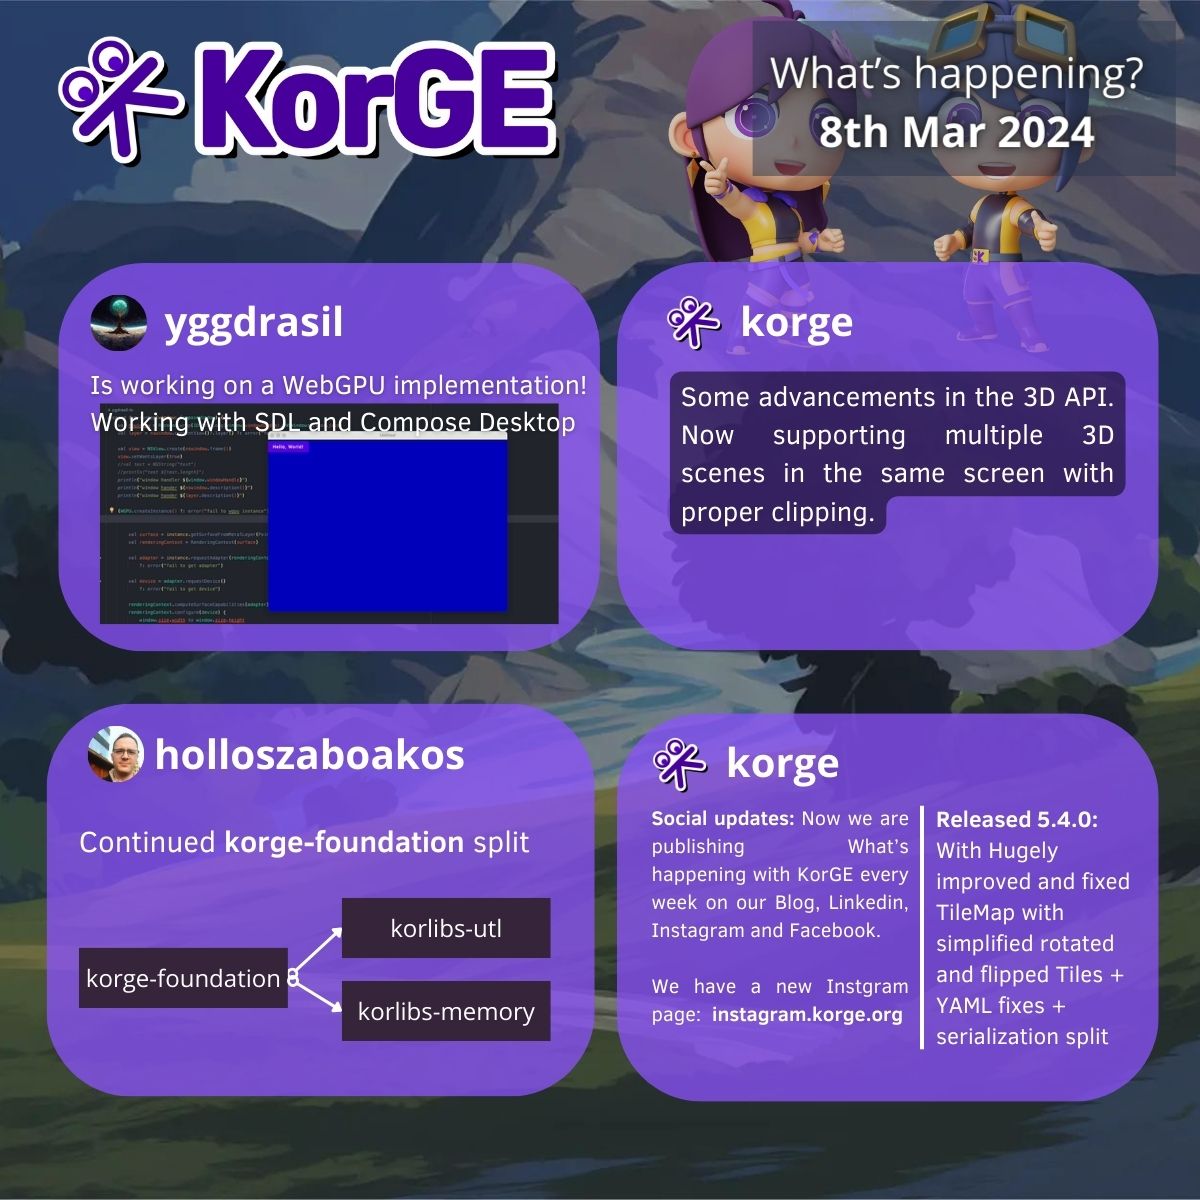 What's Happening with KorGe 8th March 2024